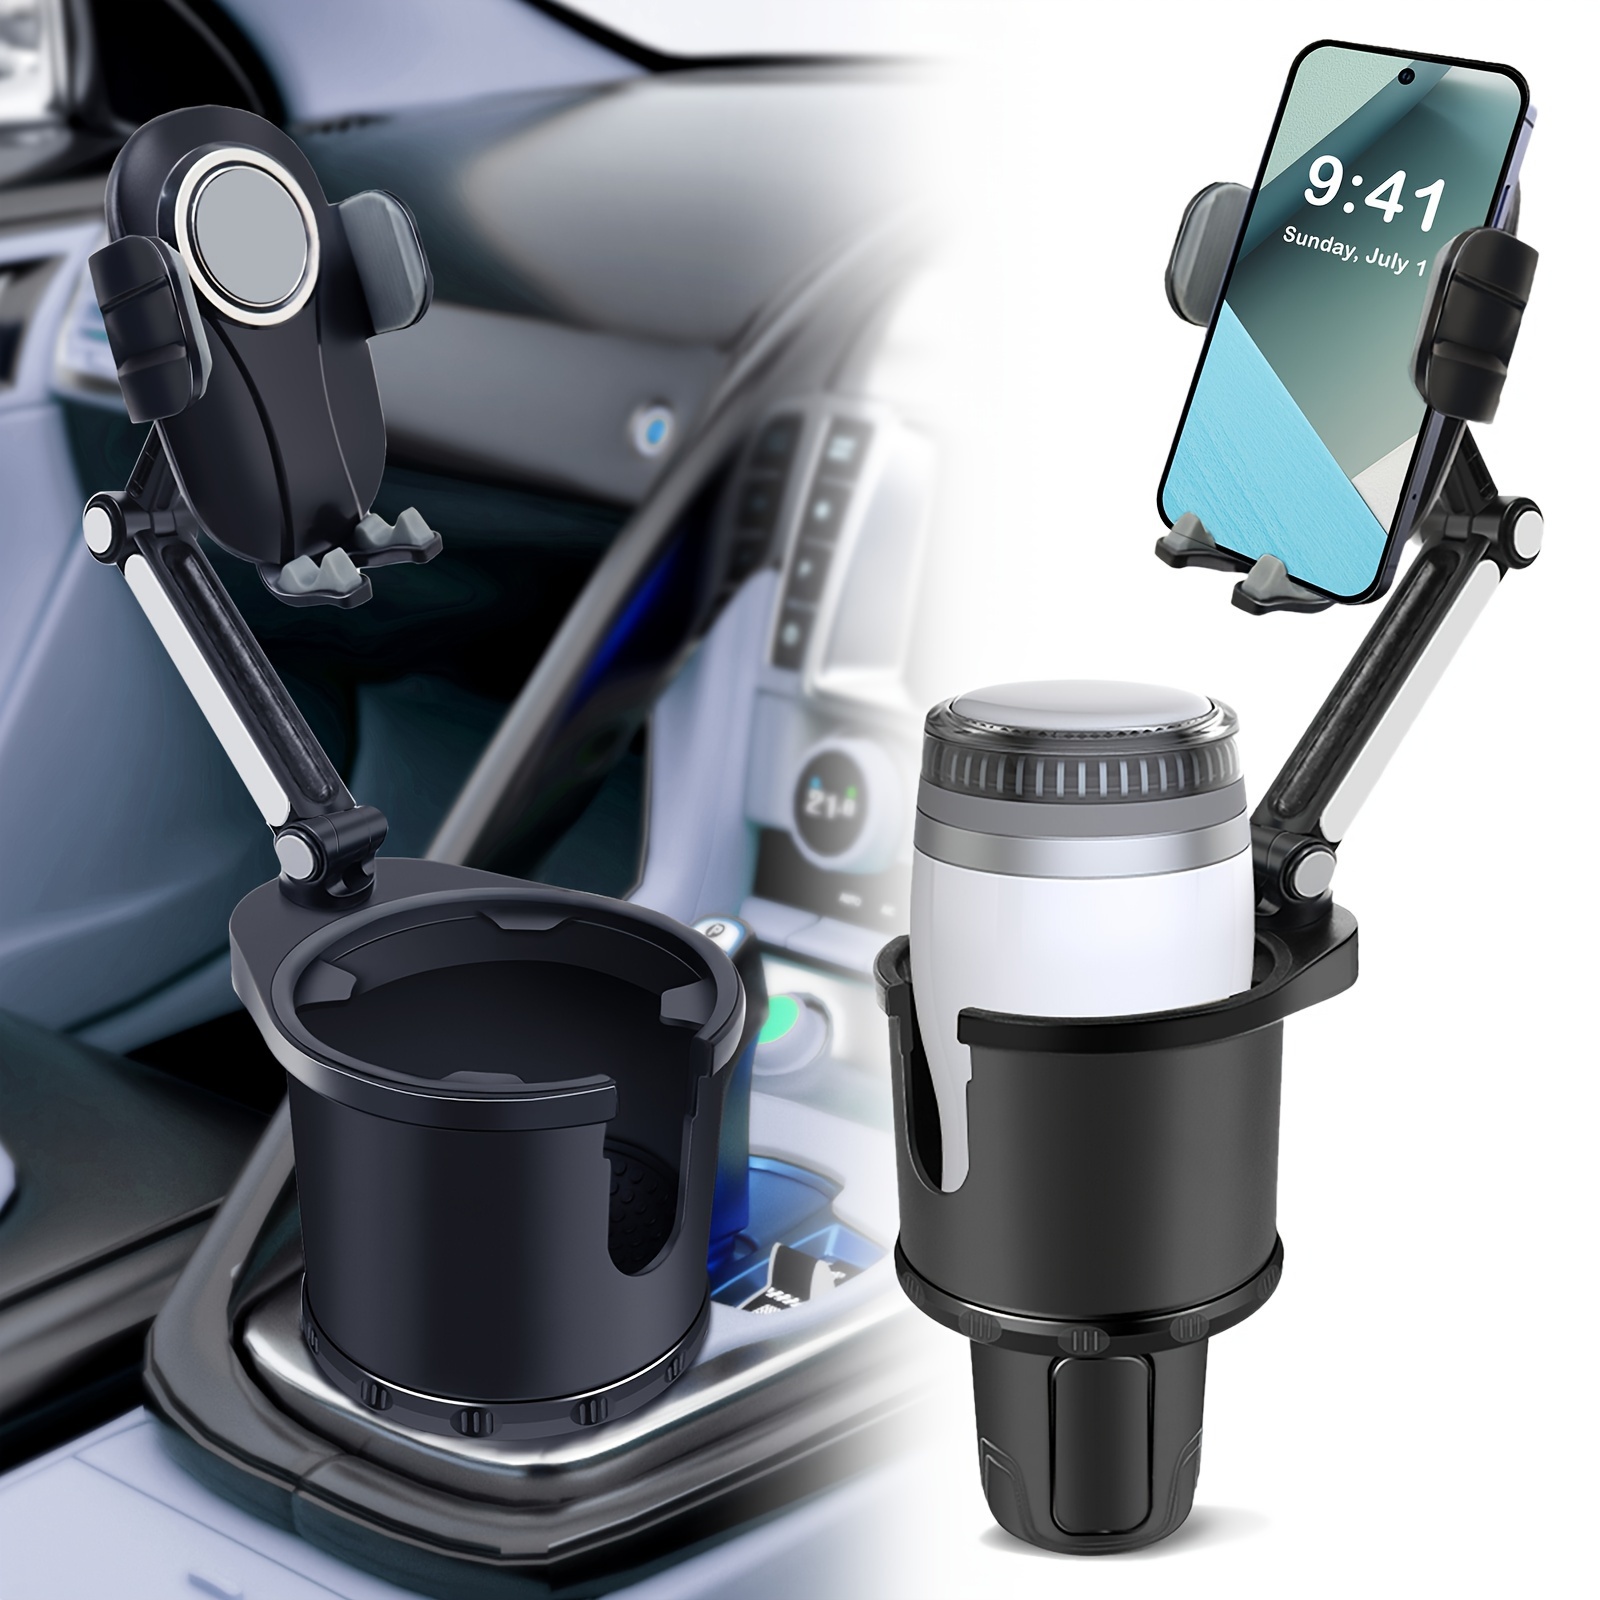 https://img.kwcdn.com/product/cup-holder-phone-mount/d69d2f15w98k18-51b624c3/fancy/4a0aba9a-ae04-47e5-9219-b0fefecd9c80.jpg?imageView2/2/w/500/q/60/format/webp